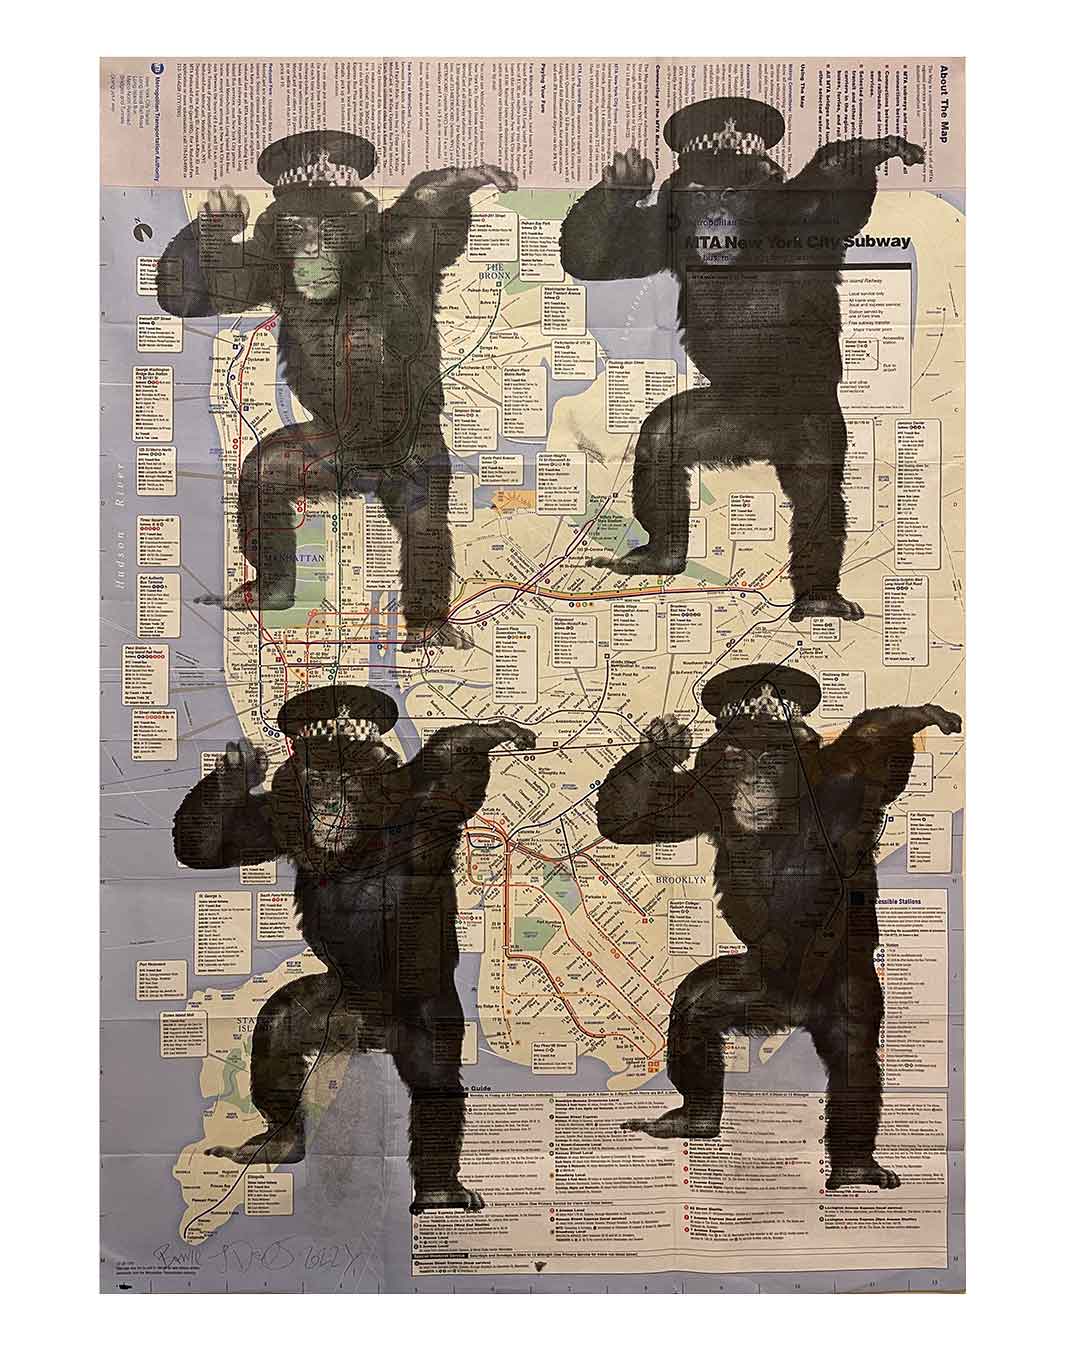 New York Bored Ape Print by Barrie J Davies 2022, unframed Silkscreen print on paper (hand finished) edition of 1/1, size 83cm x 58cm.